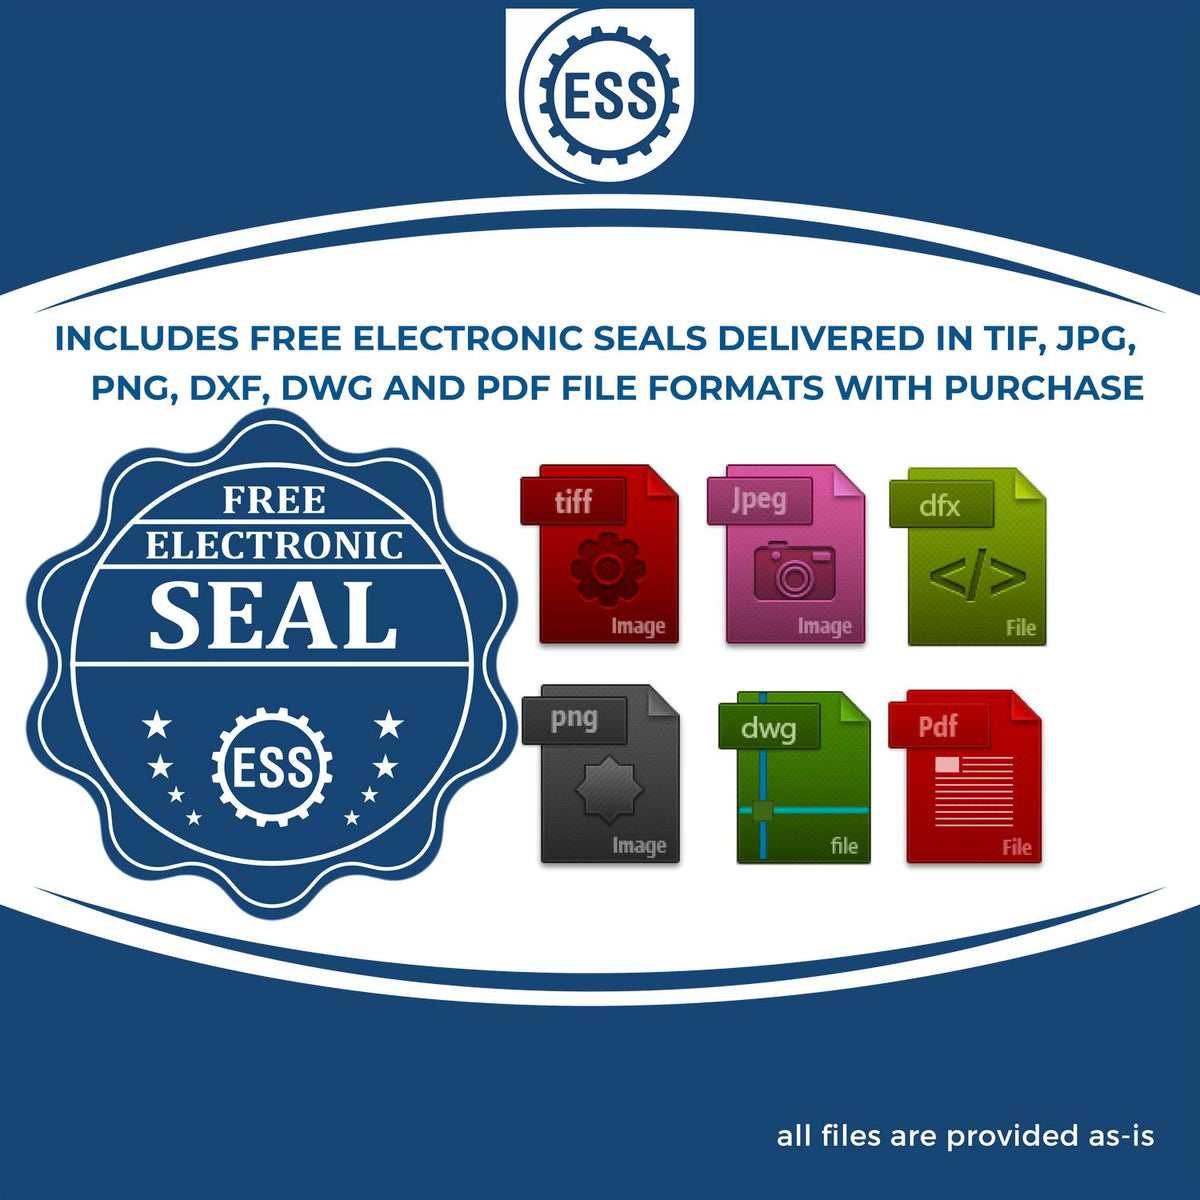 An infographic for the free electronic seal for the Slim Pre-Inked South Dakota Professional Geologist Seal Stamp illustrating the different file type icons such as DXF, DWG, TIF, JPG and PNG.